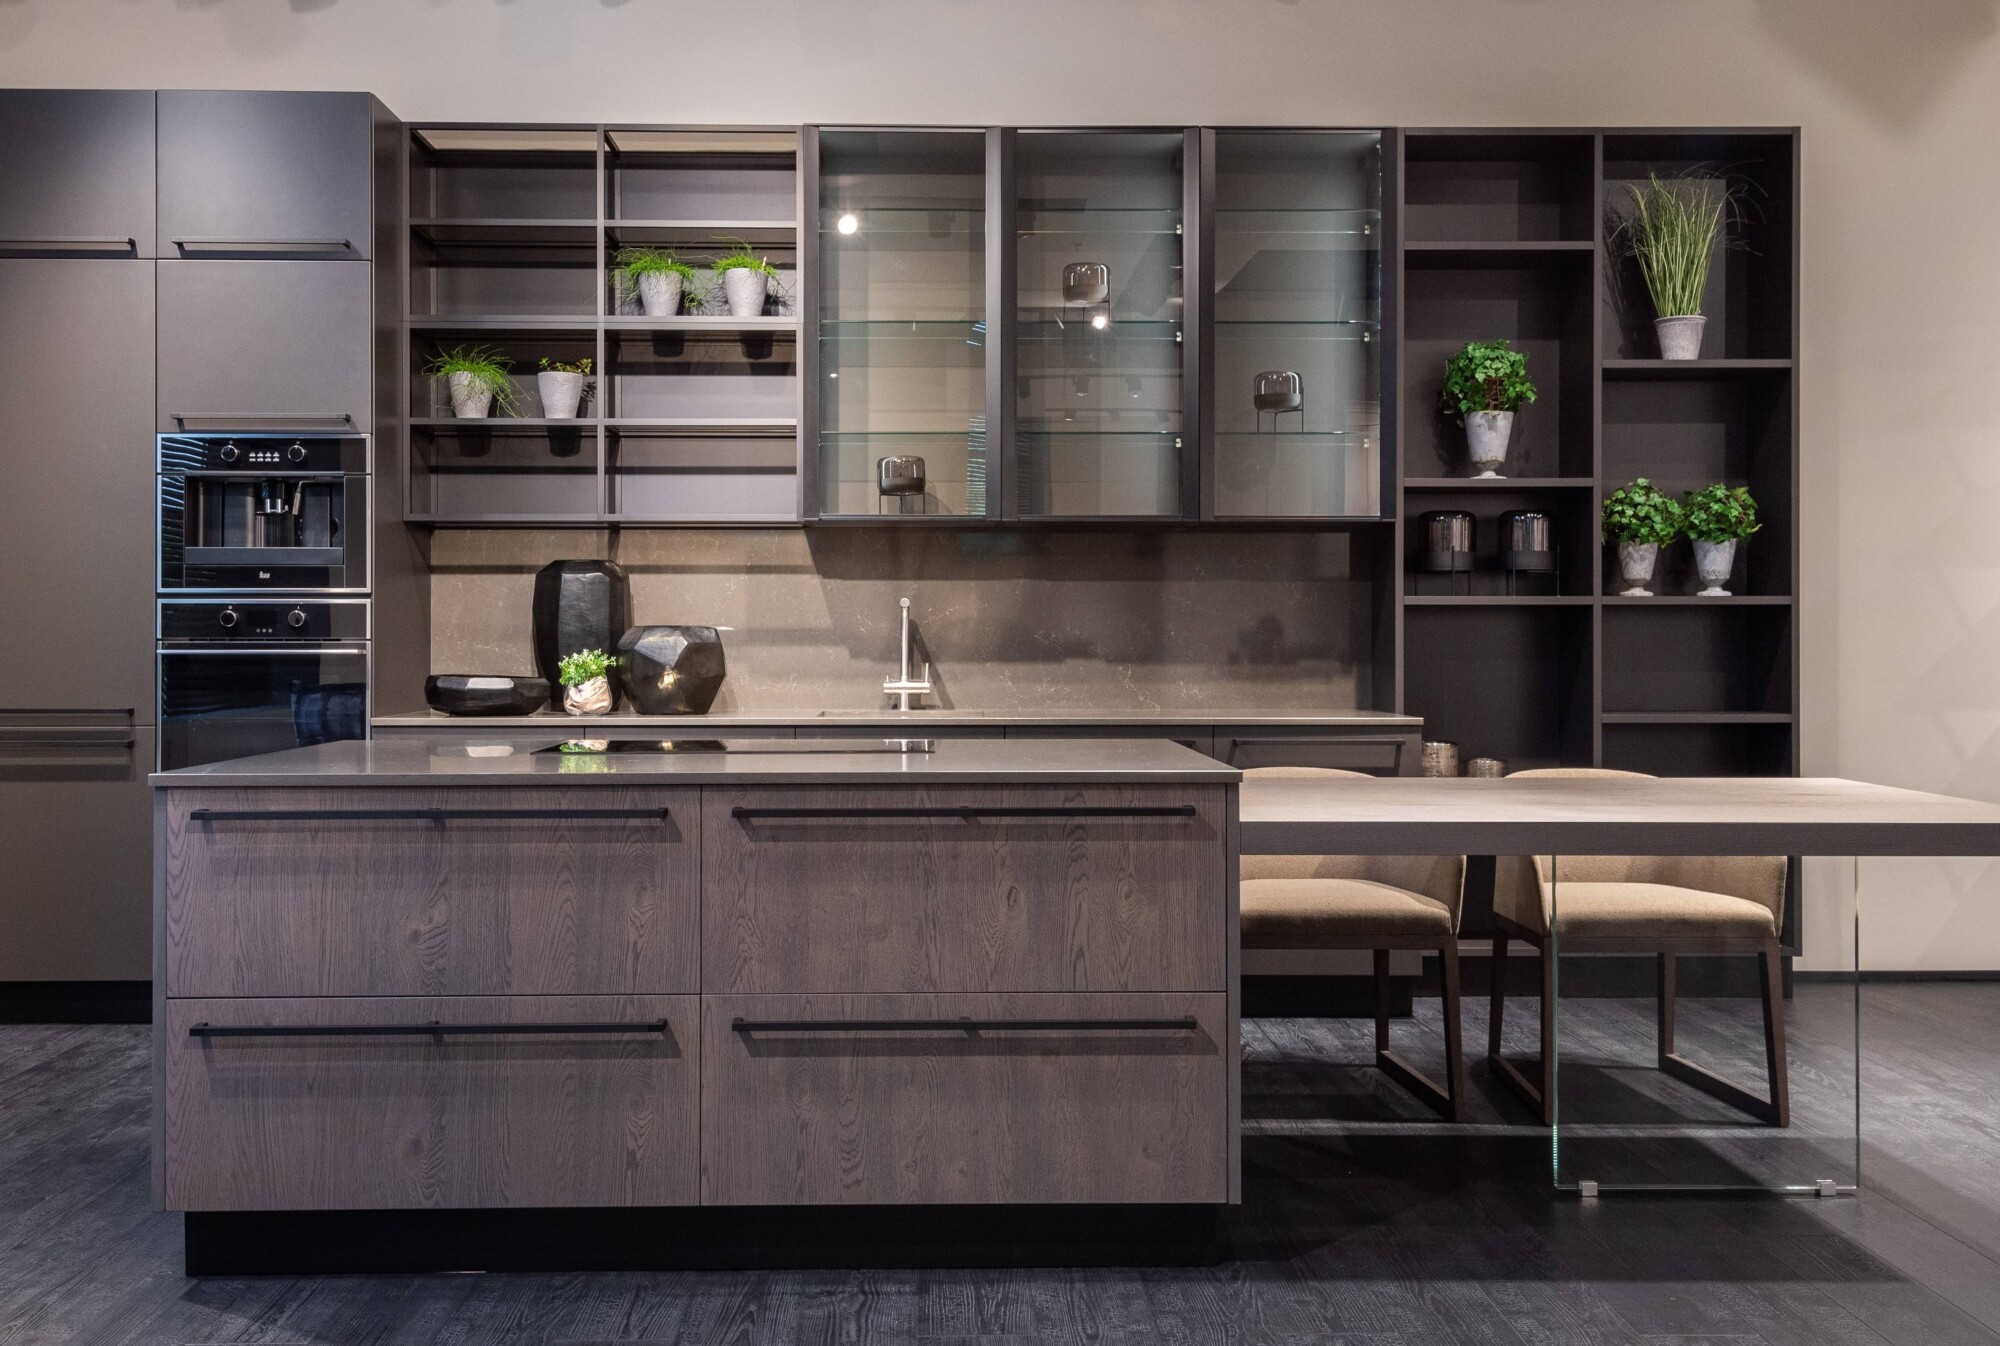 A Redesigned new build kitchen featuring dark brown kitchen with large shelves, a kitchen island and dining table